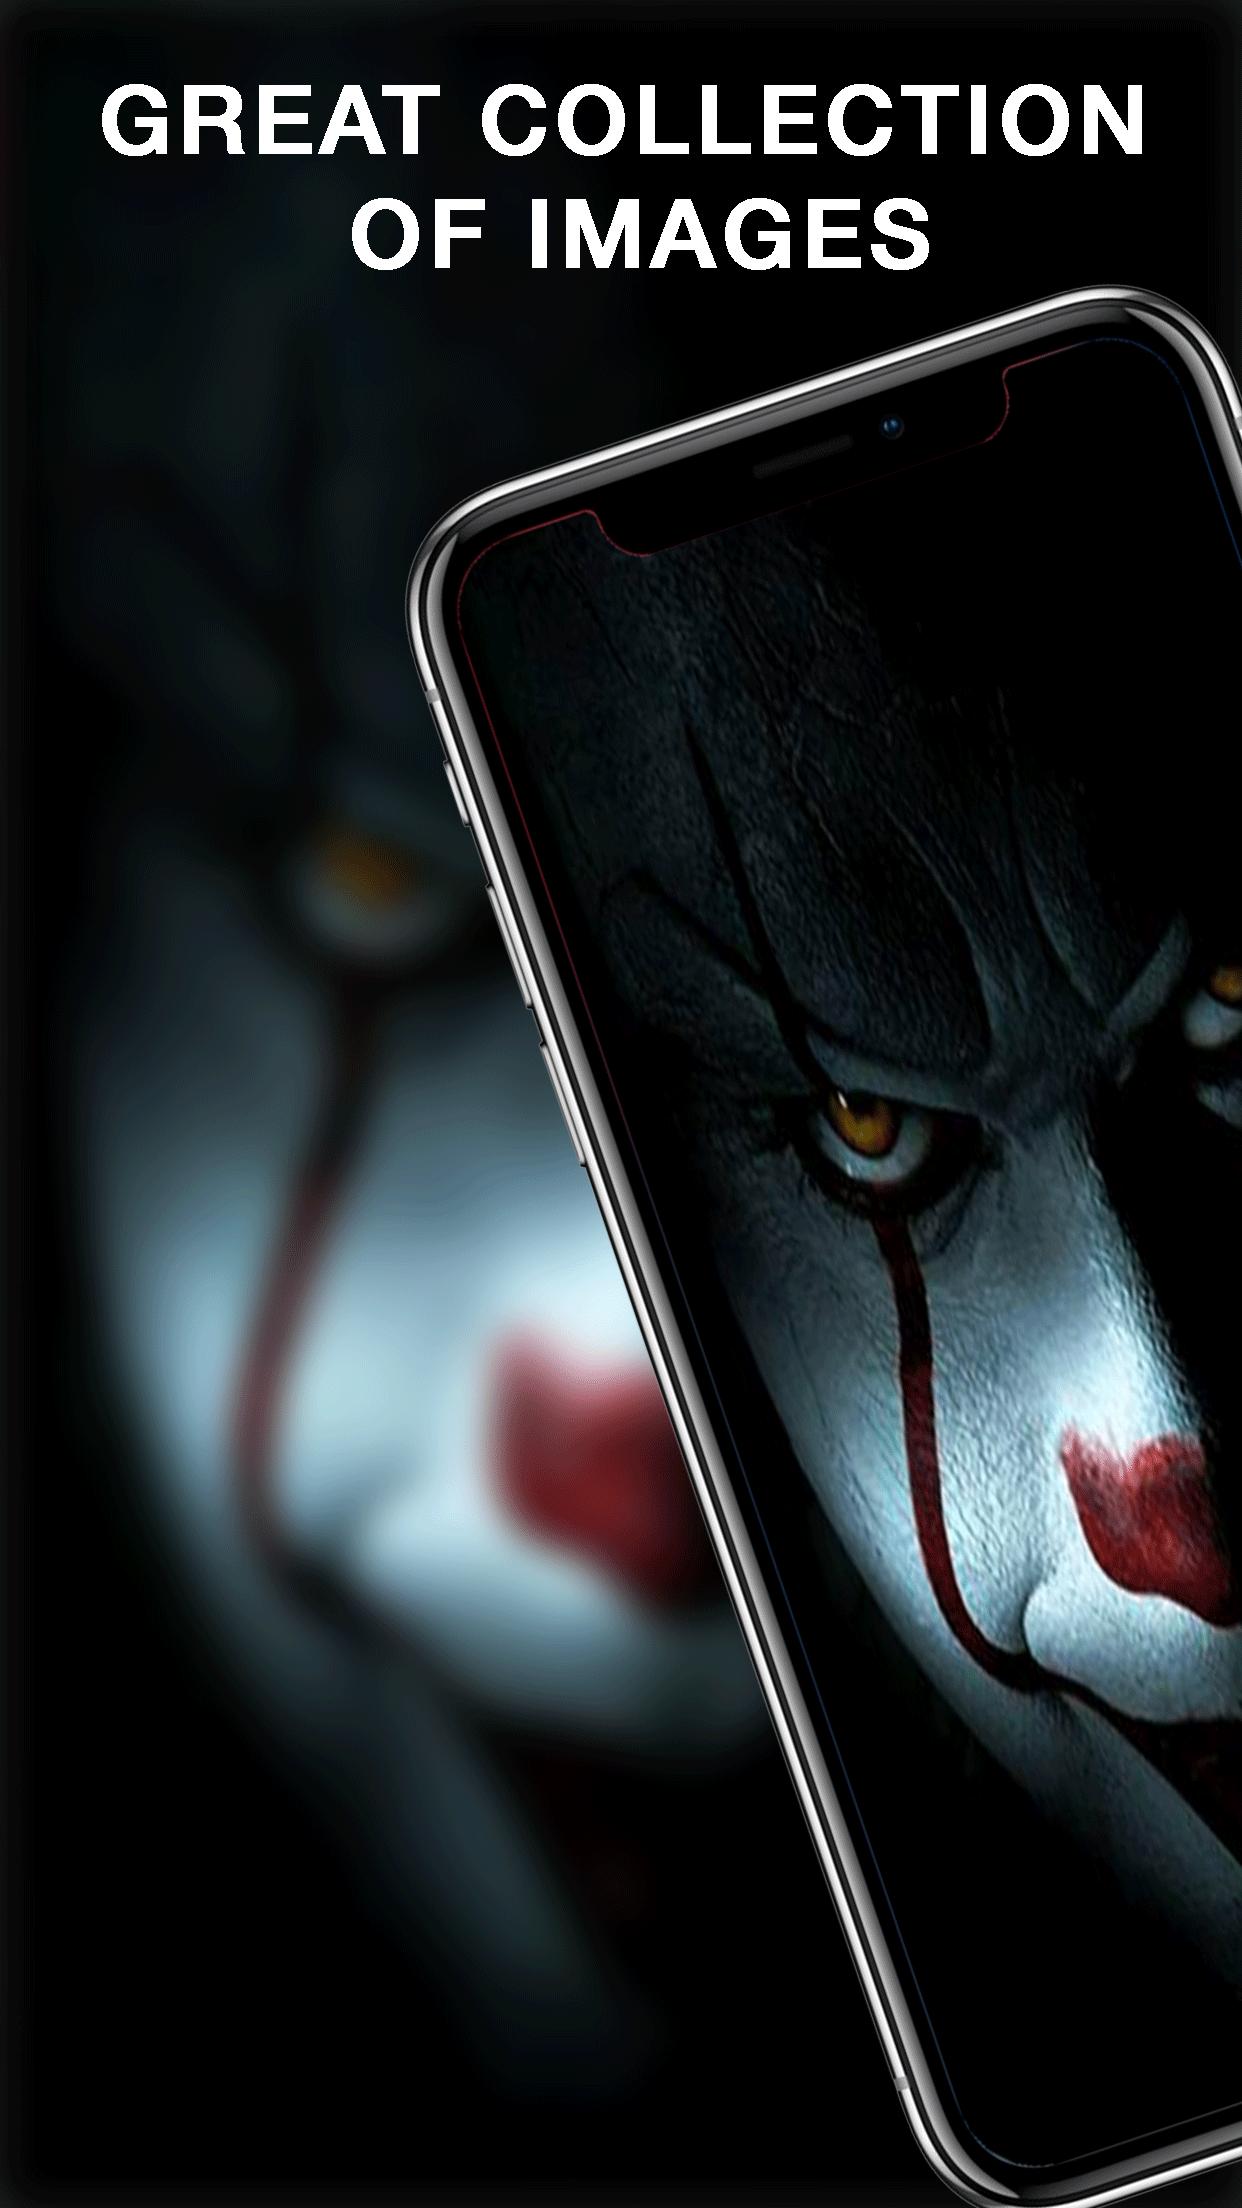 Ð pennywise wallpapers hd k for live ð apk for android download